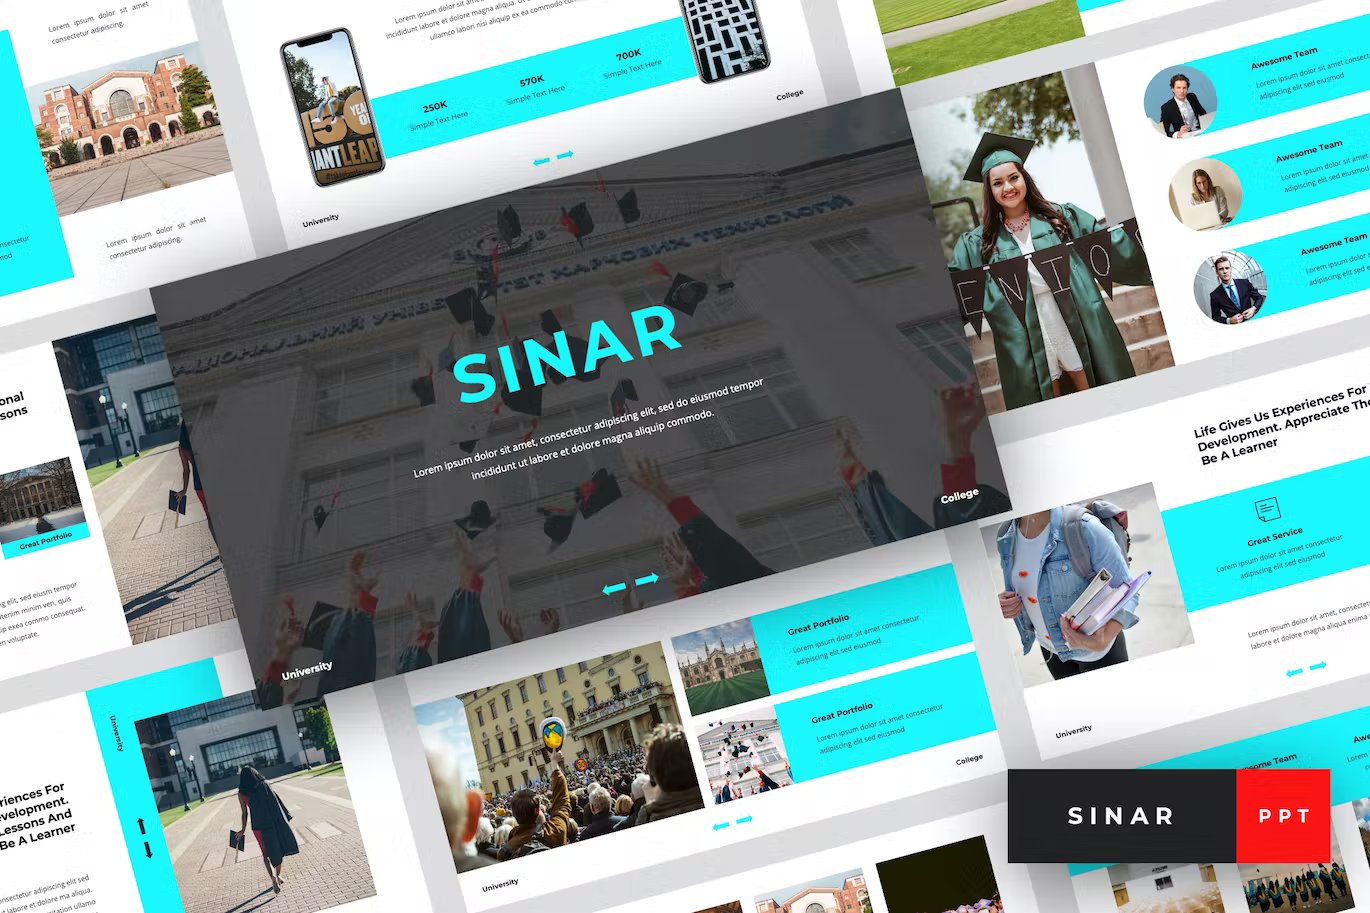 A set of different sinar universiteit presentation templates in light blue, white, gray and black on a gray background.